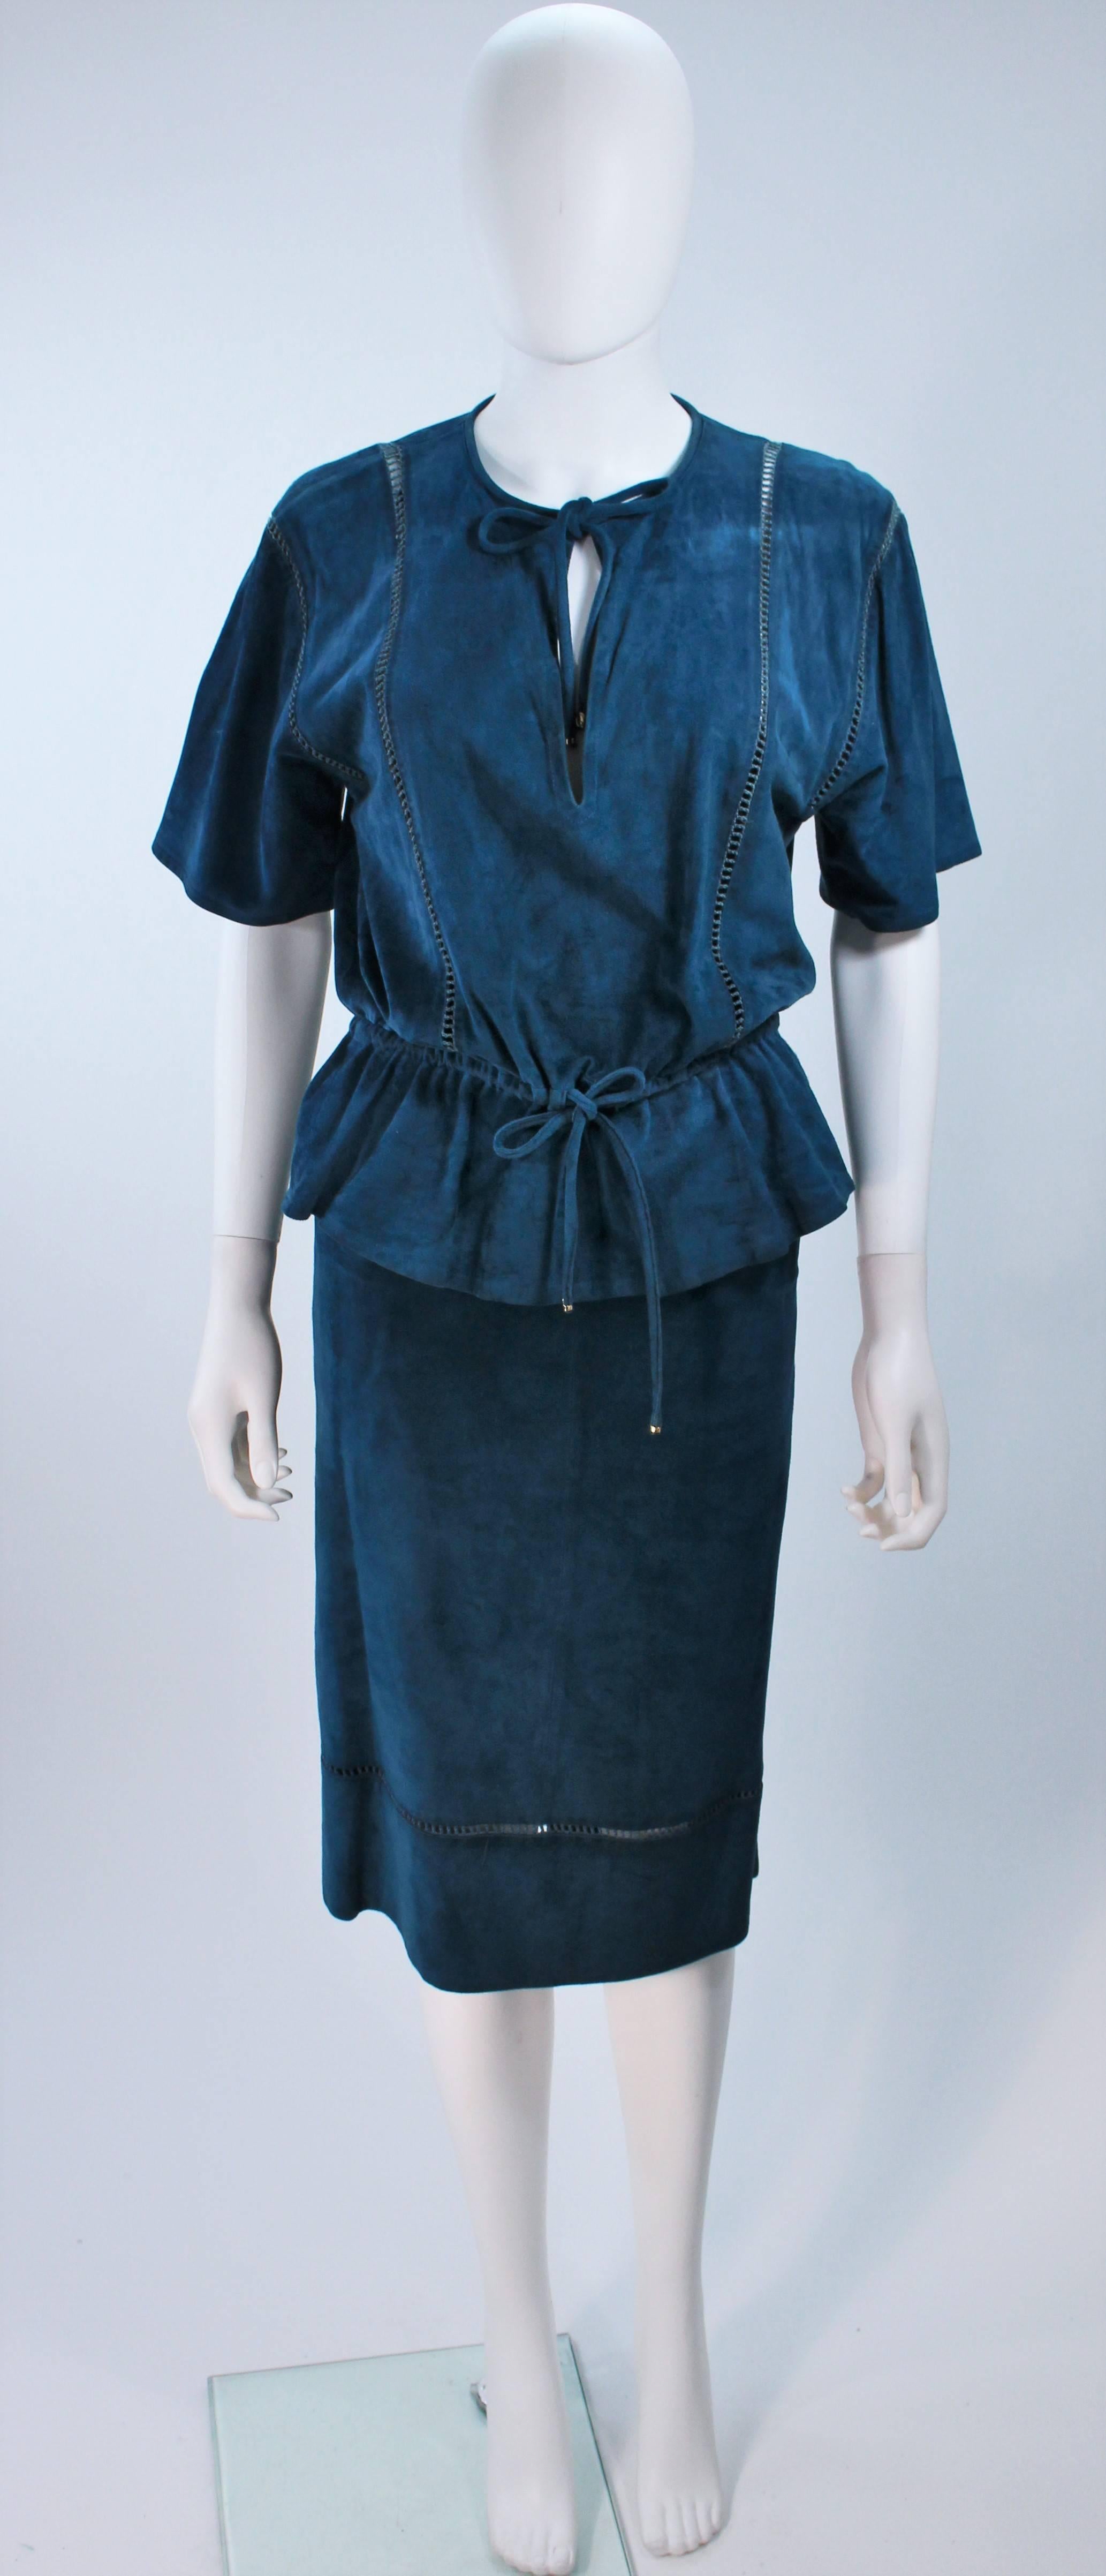  This Gucci  1970's set is composed of teal suede. The top has tie details at the neck and waist. The skirt has a center back zipper closure. In great vintage condition, some color variation. 

  **Please cross-reference measurements for personal